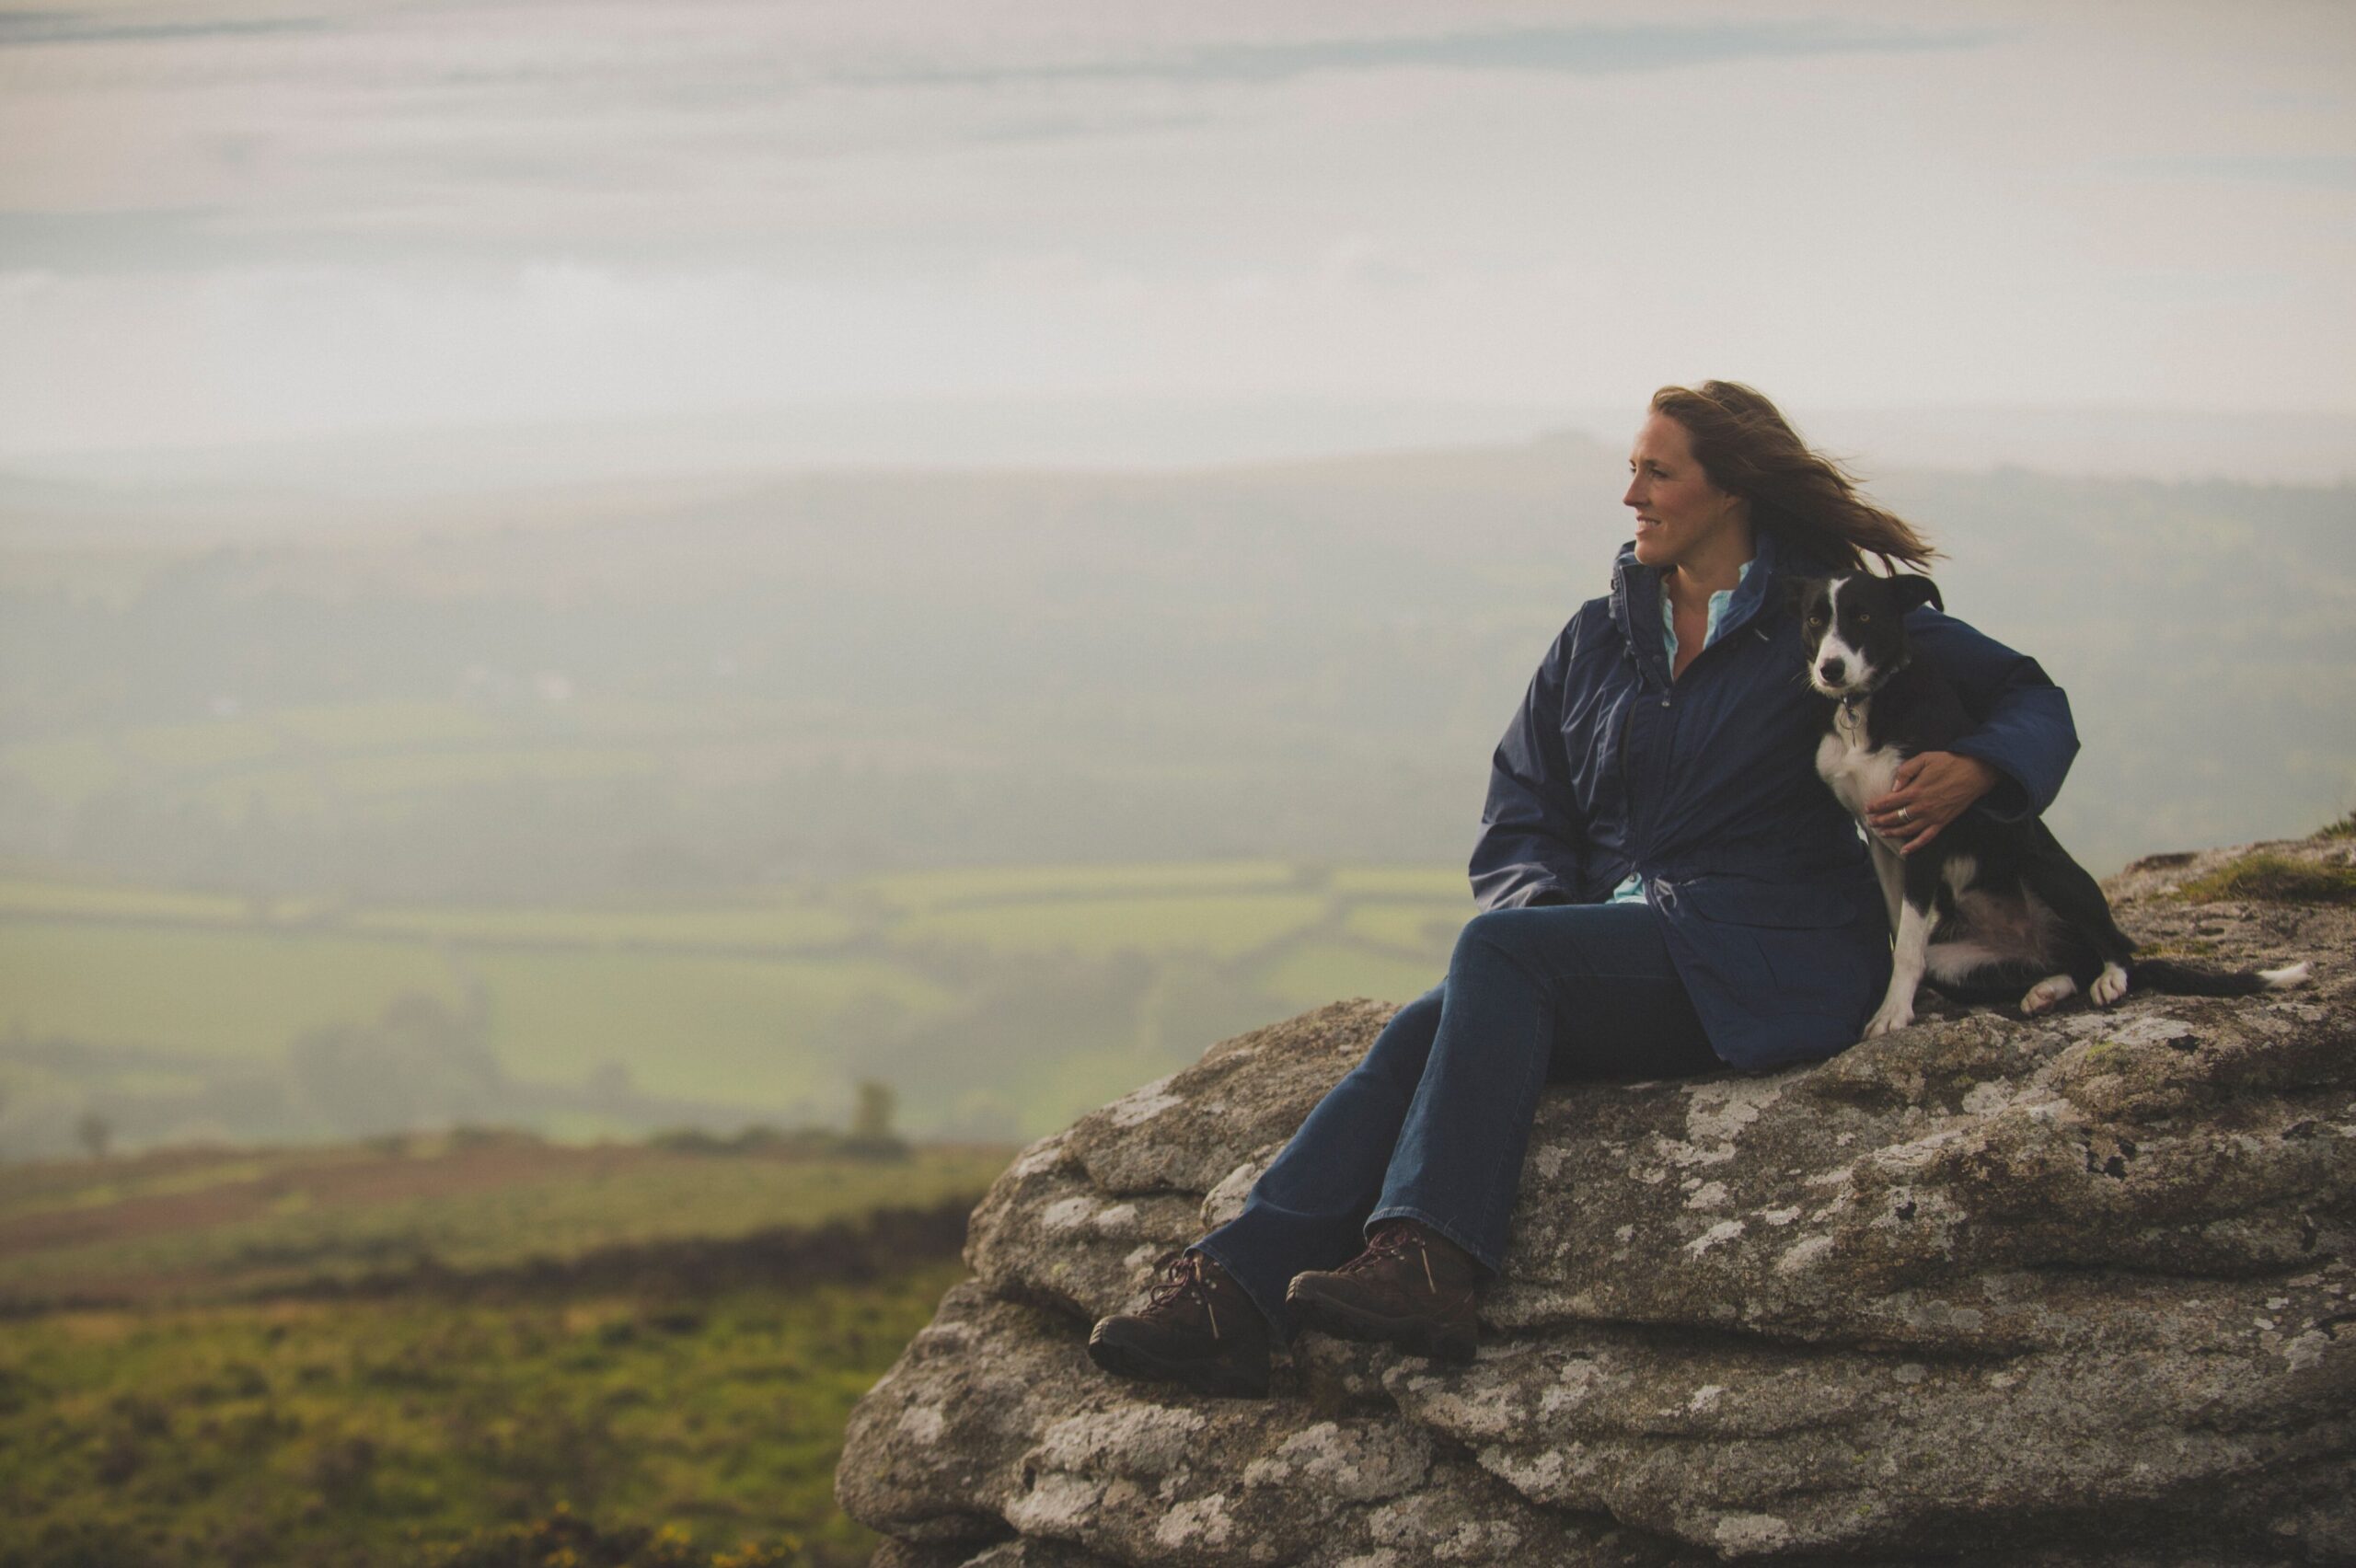 Dartmoor’s Daughter, Emma Cunis, on Mother Nature’s maternal power